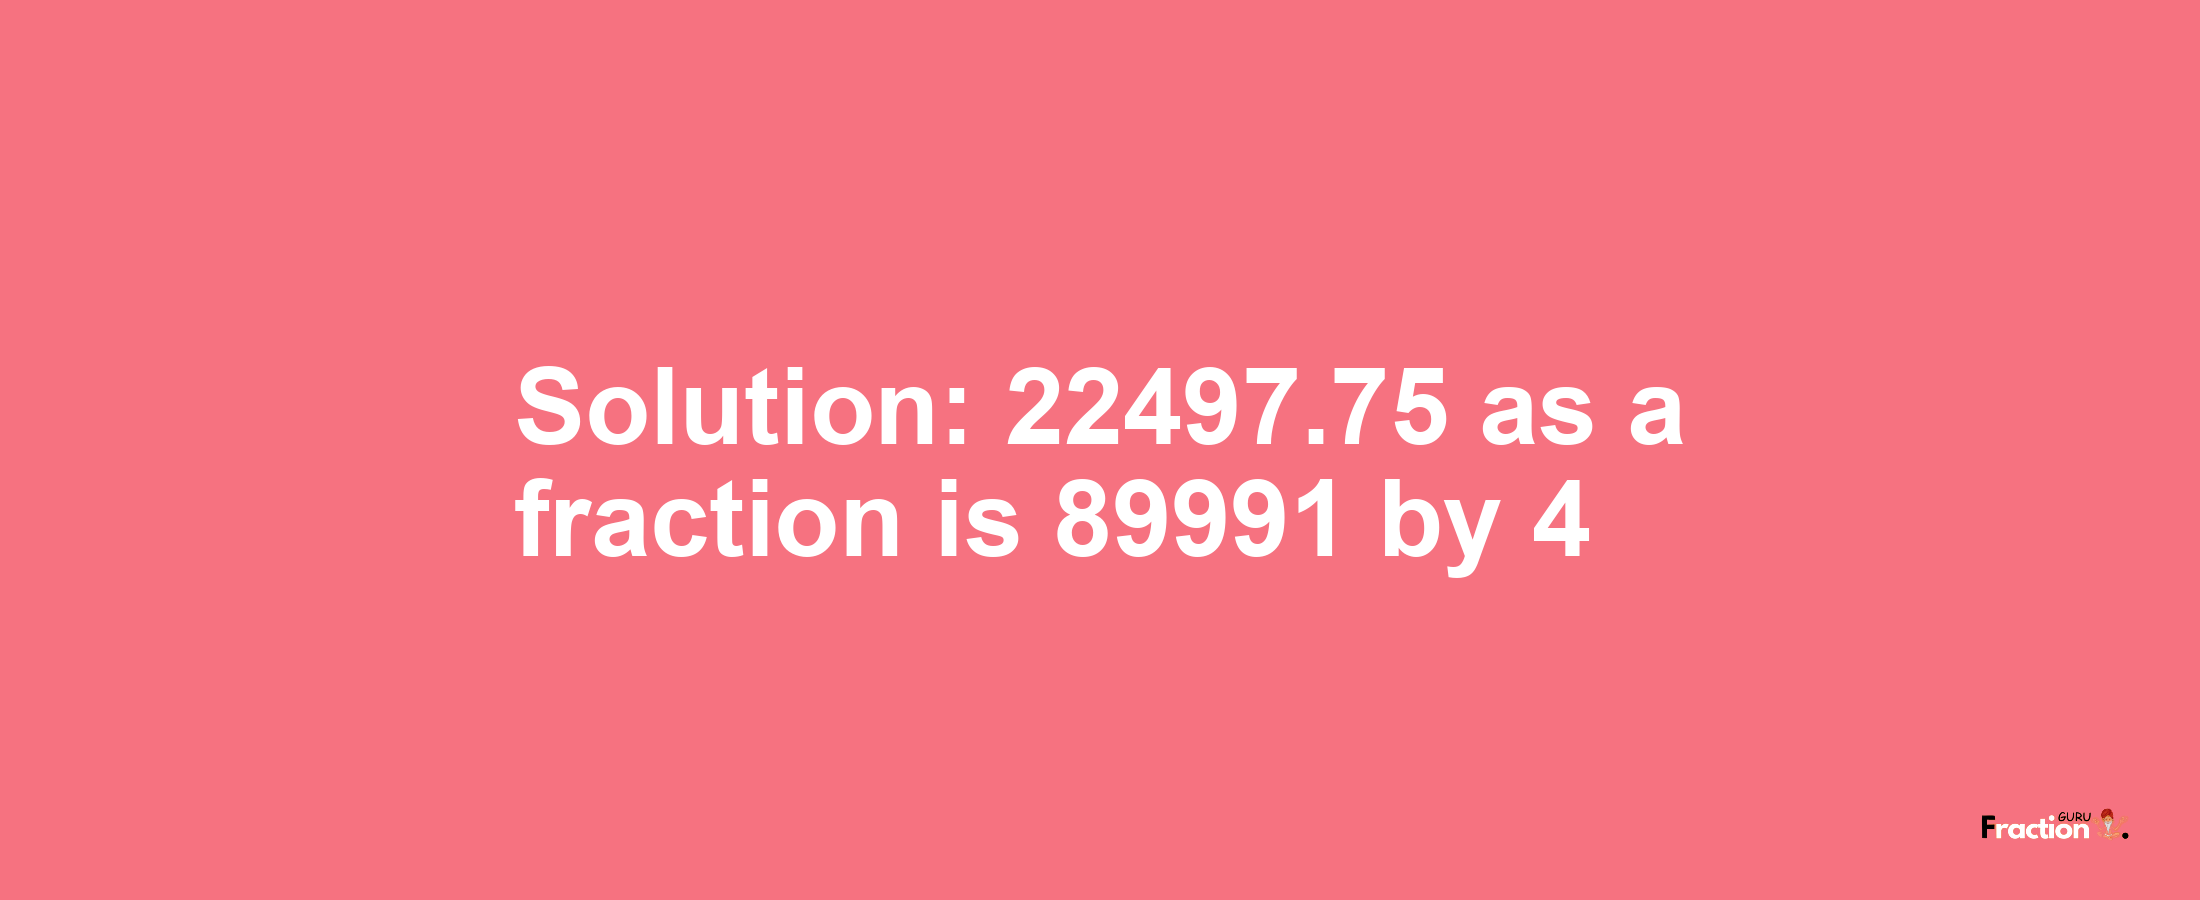 Solution:22497.75 as a fraction is 89991/4